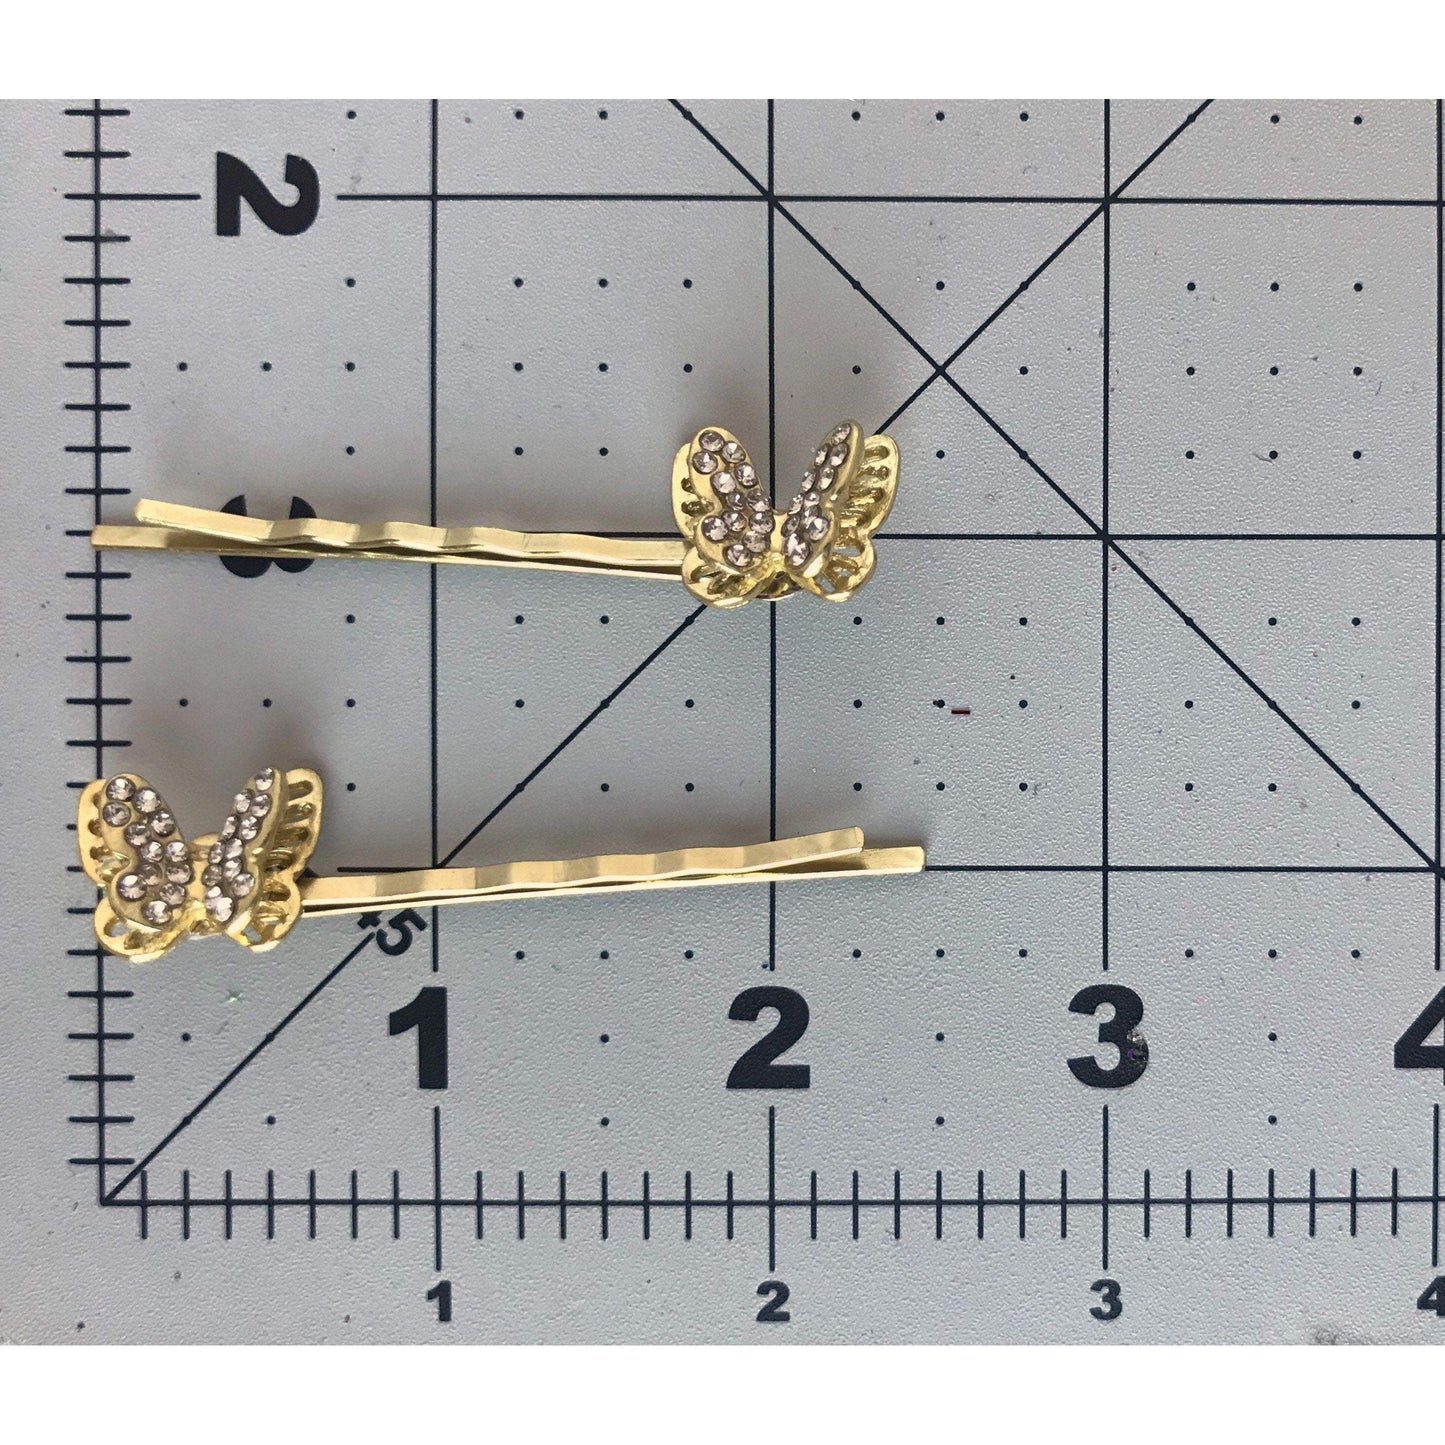 Gold Rhinestone Butterfly Hair Pins - Elegant Accessories for Women's Hairstyles